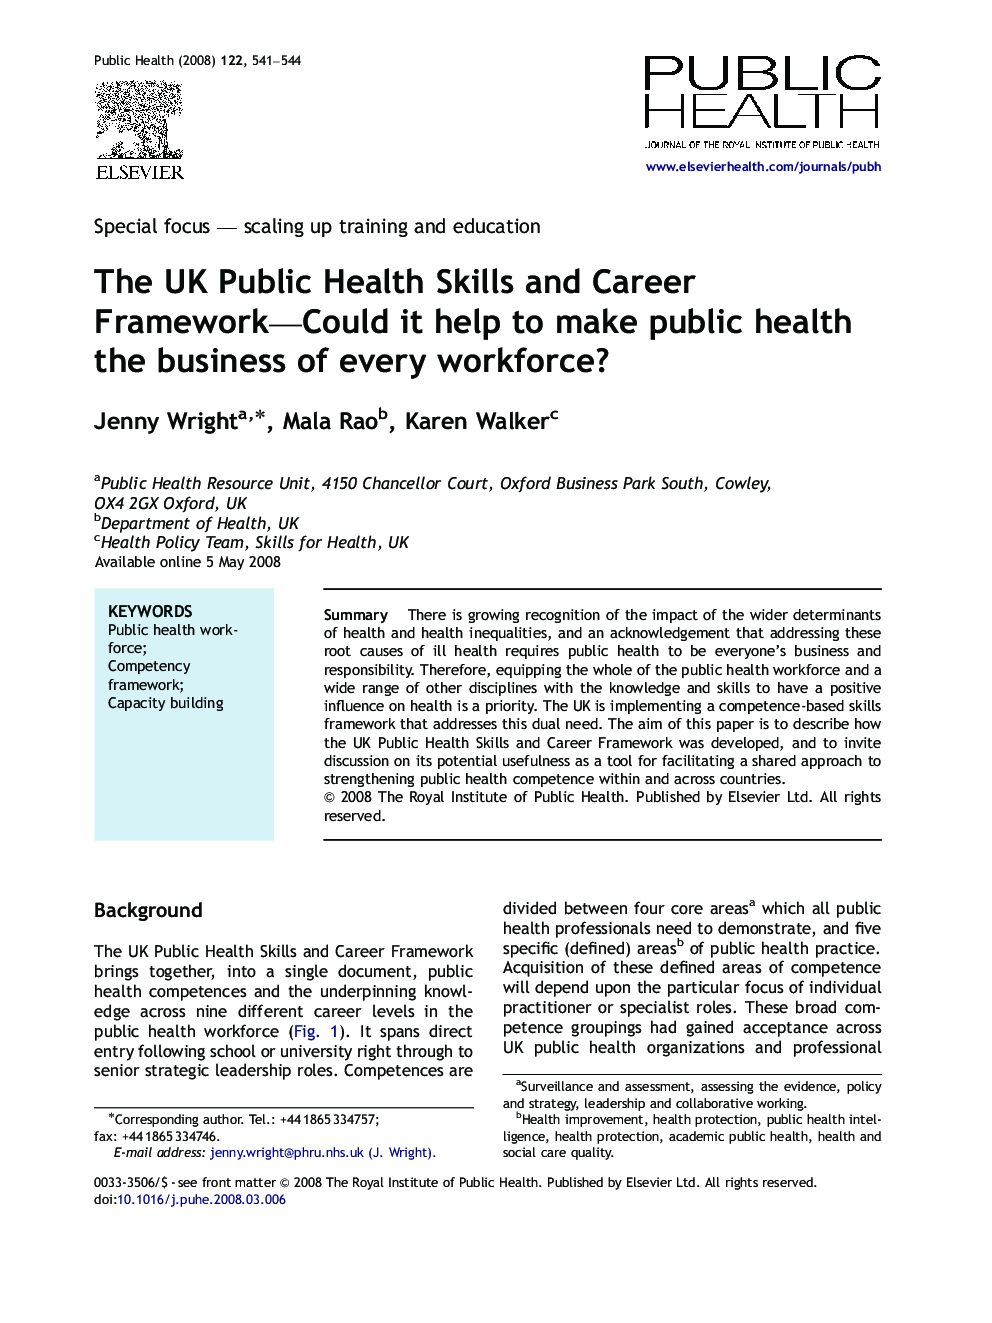 The UK Public Health Skills and Career Framework—Could it help to make public health the business of every workforce?